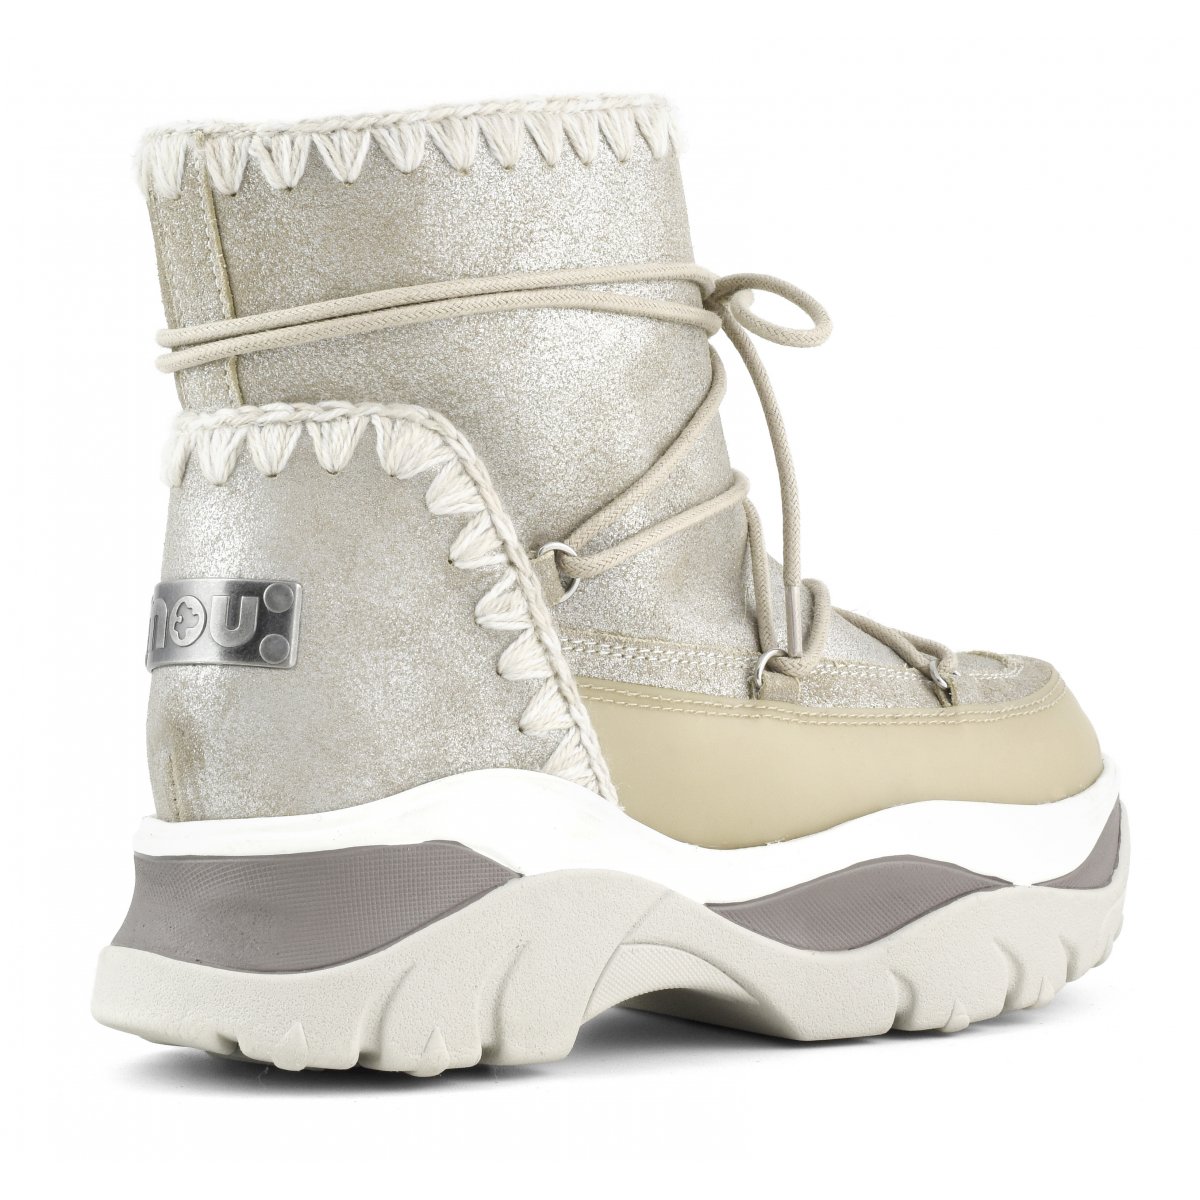 Chunky sneaker lace up boot STME img 3